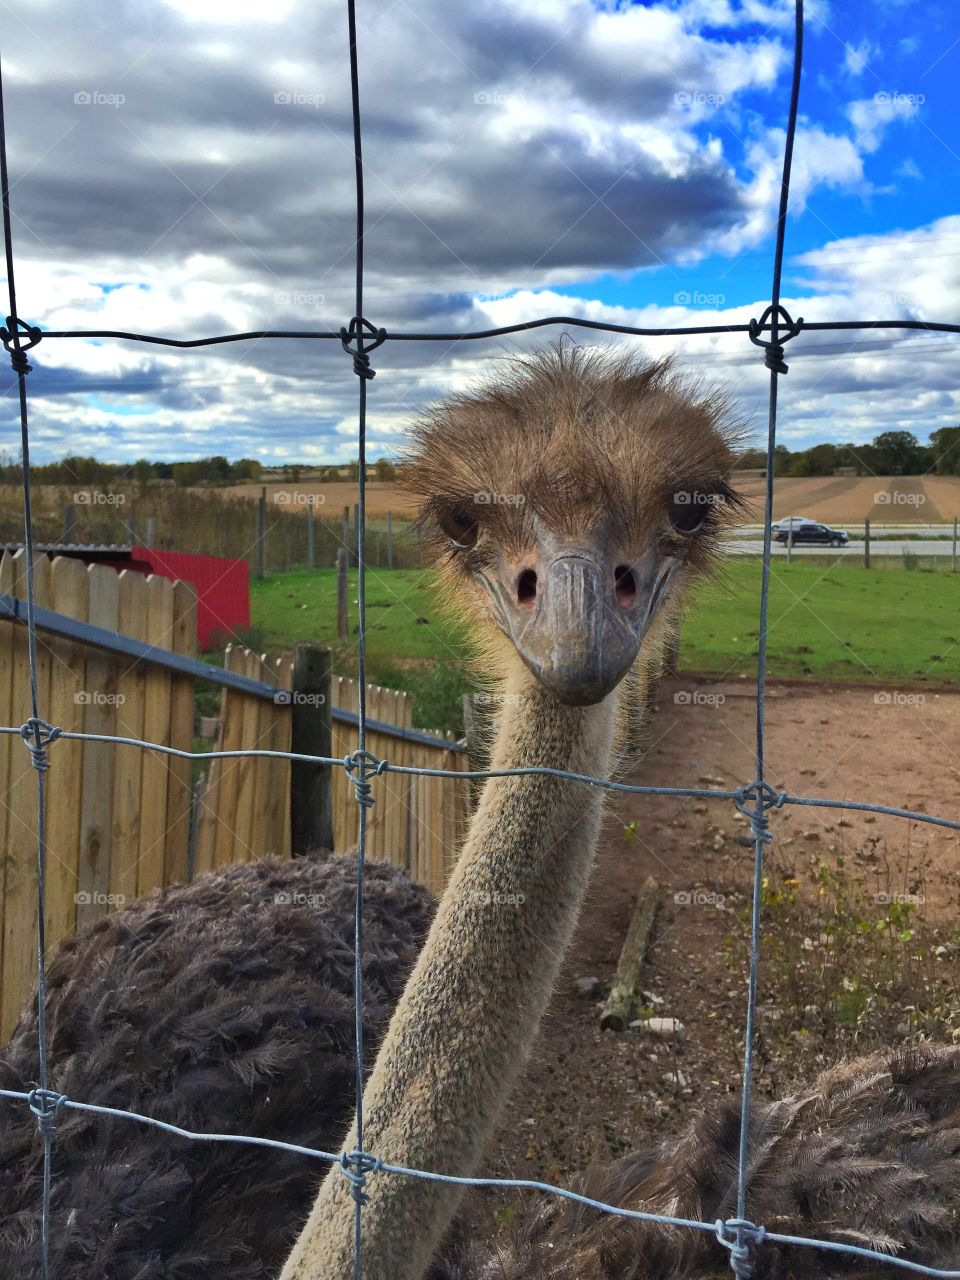 His neck of the woods. Day at the farm with the mean ostrich 